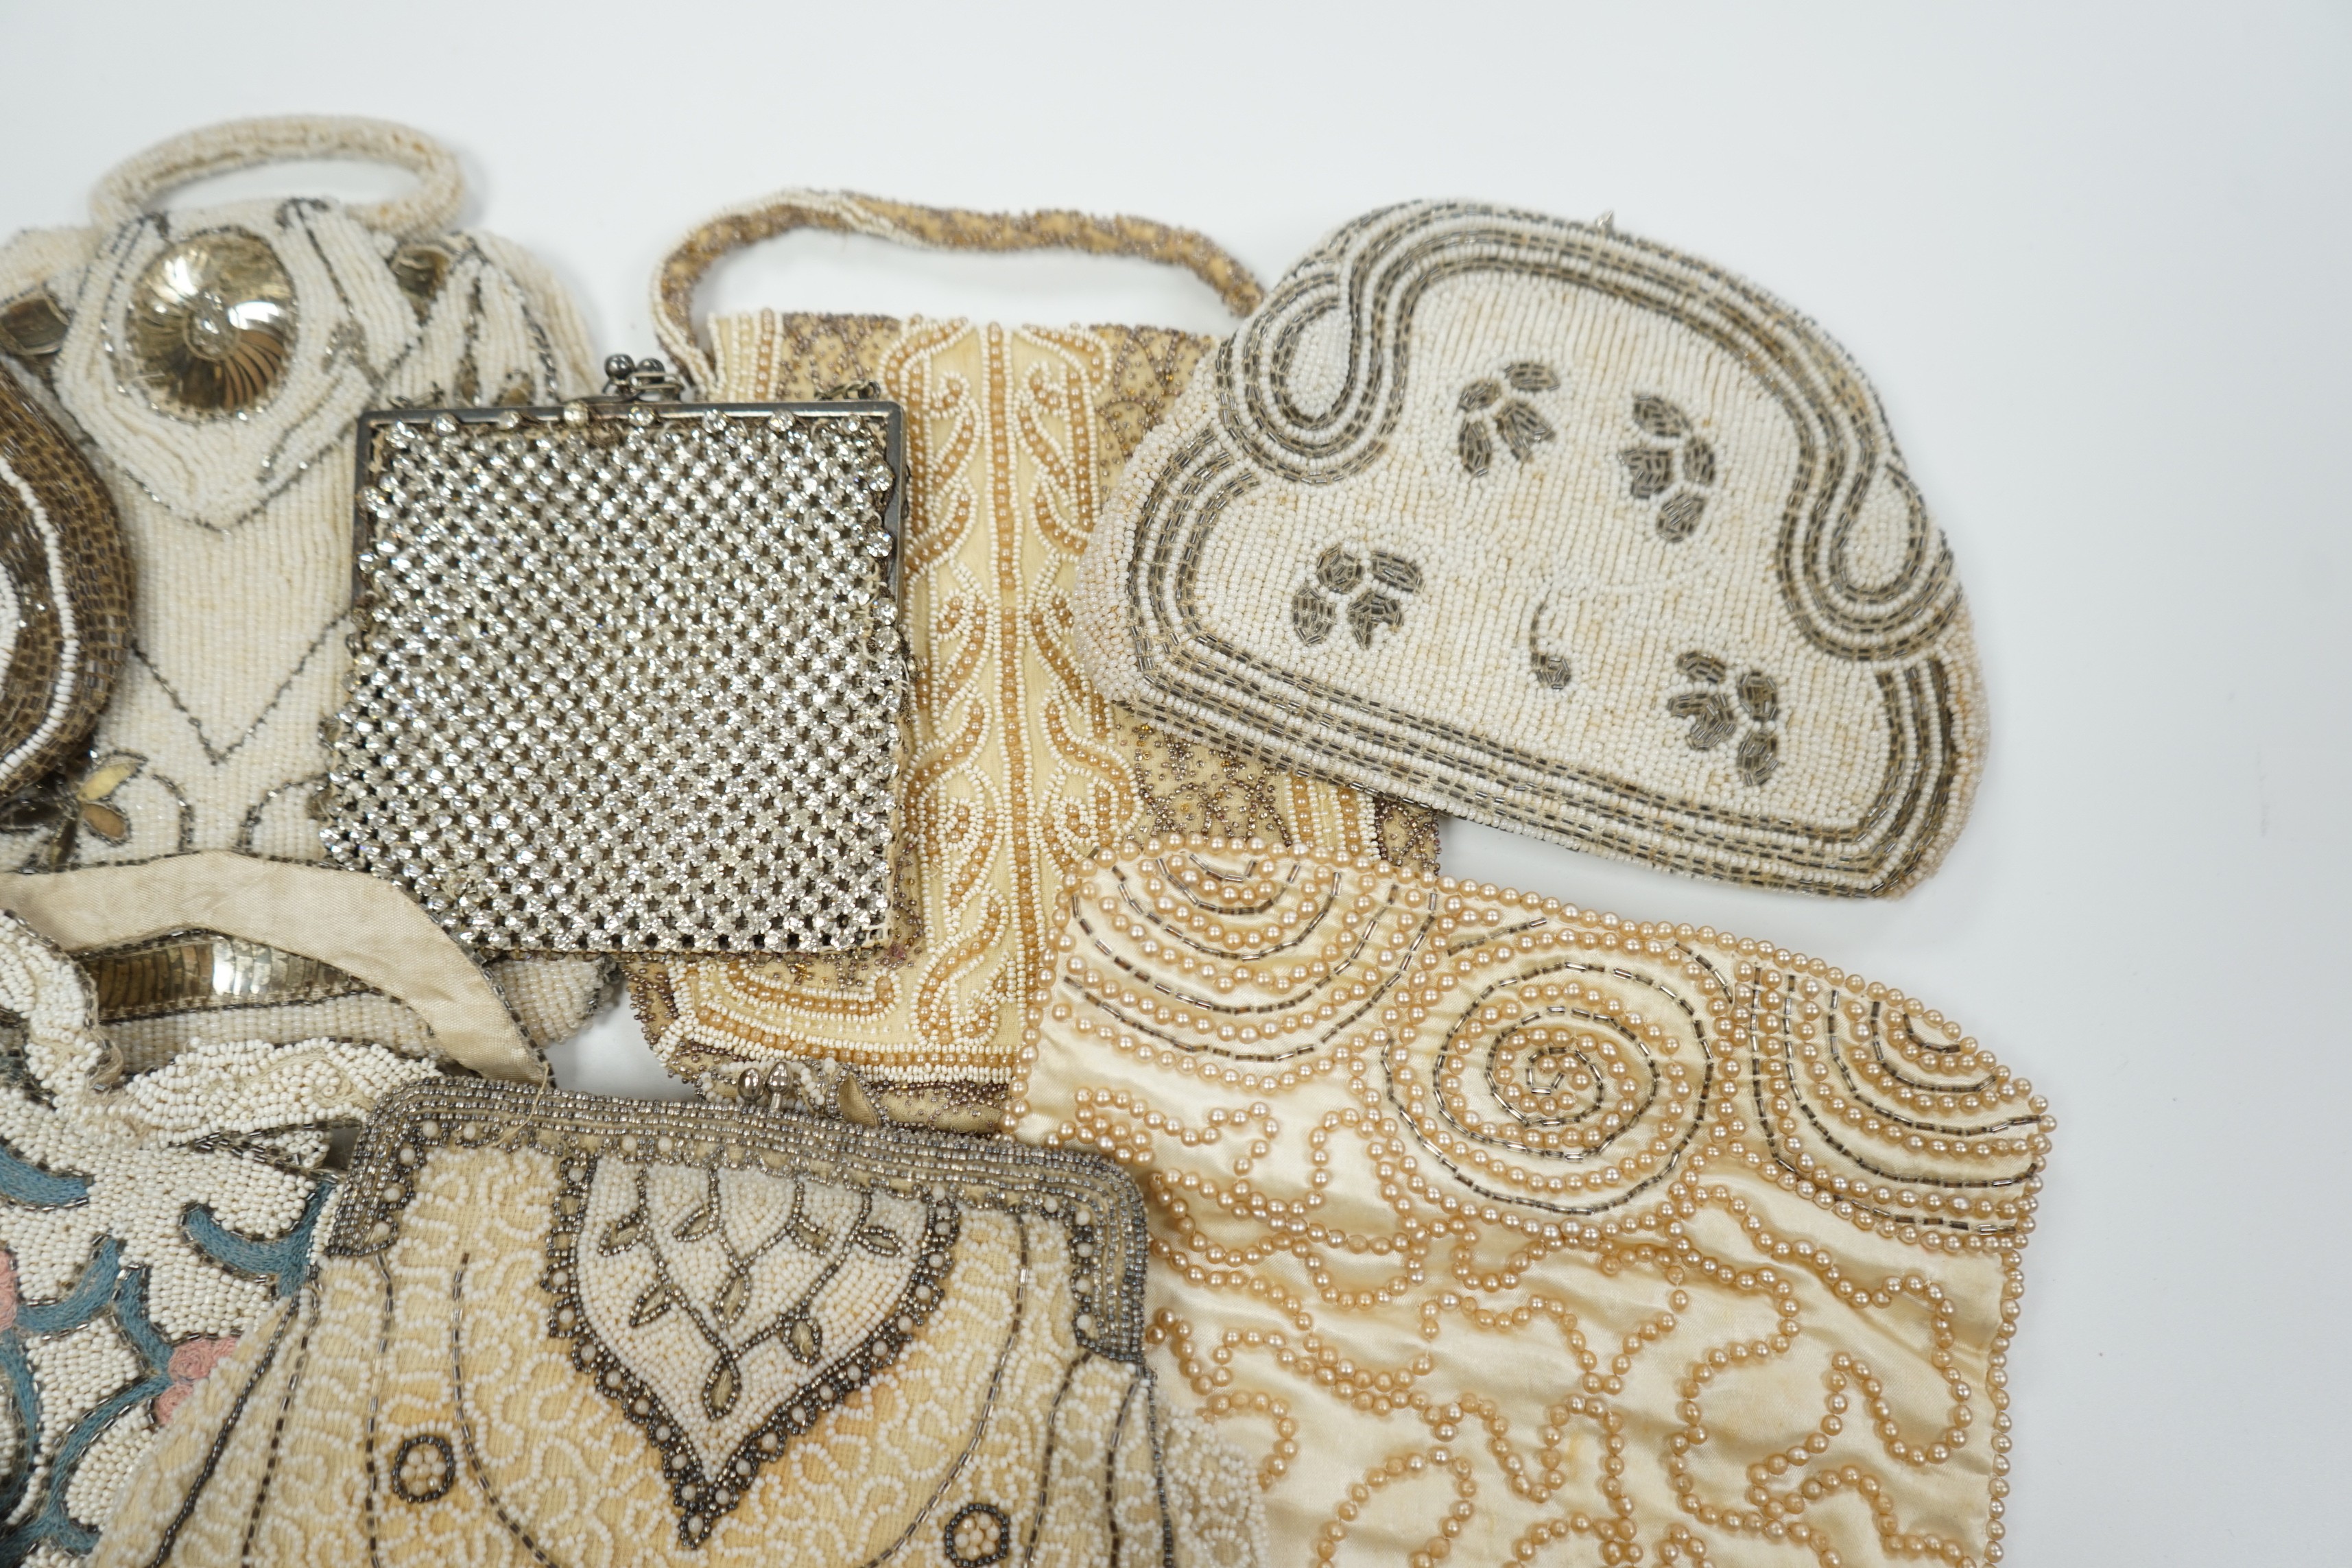 Twelve 1930’s beaded, sequin and pearl evening clutch bags and bags, some with embroidered decoration